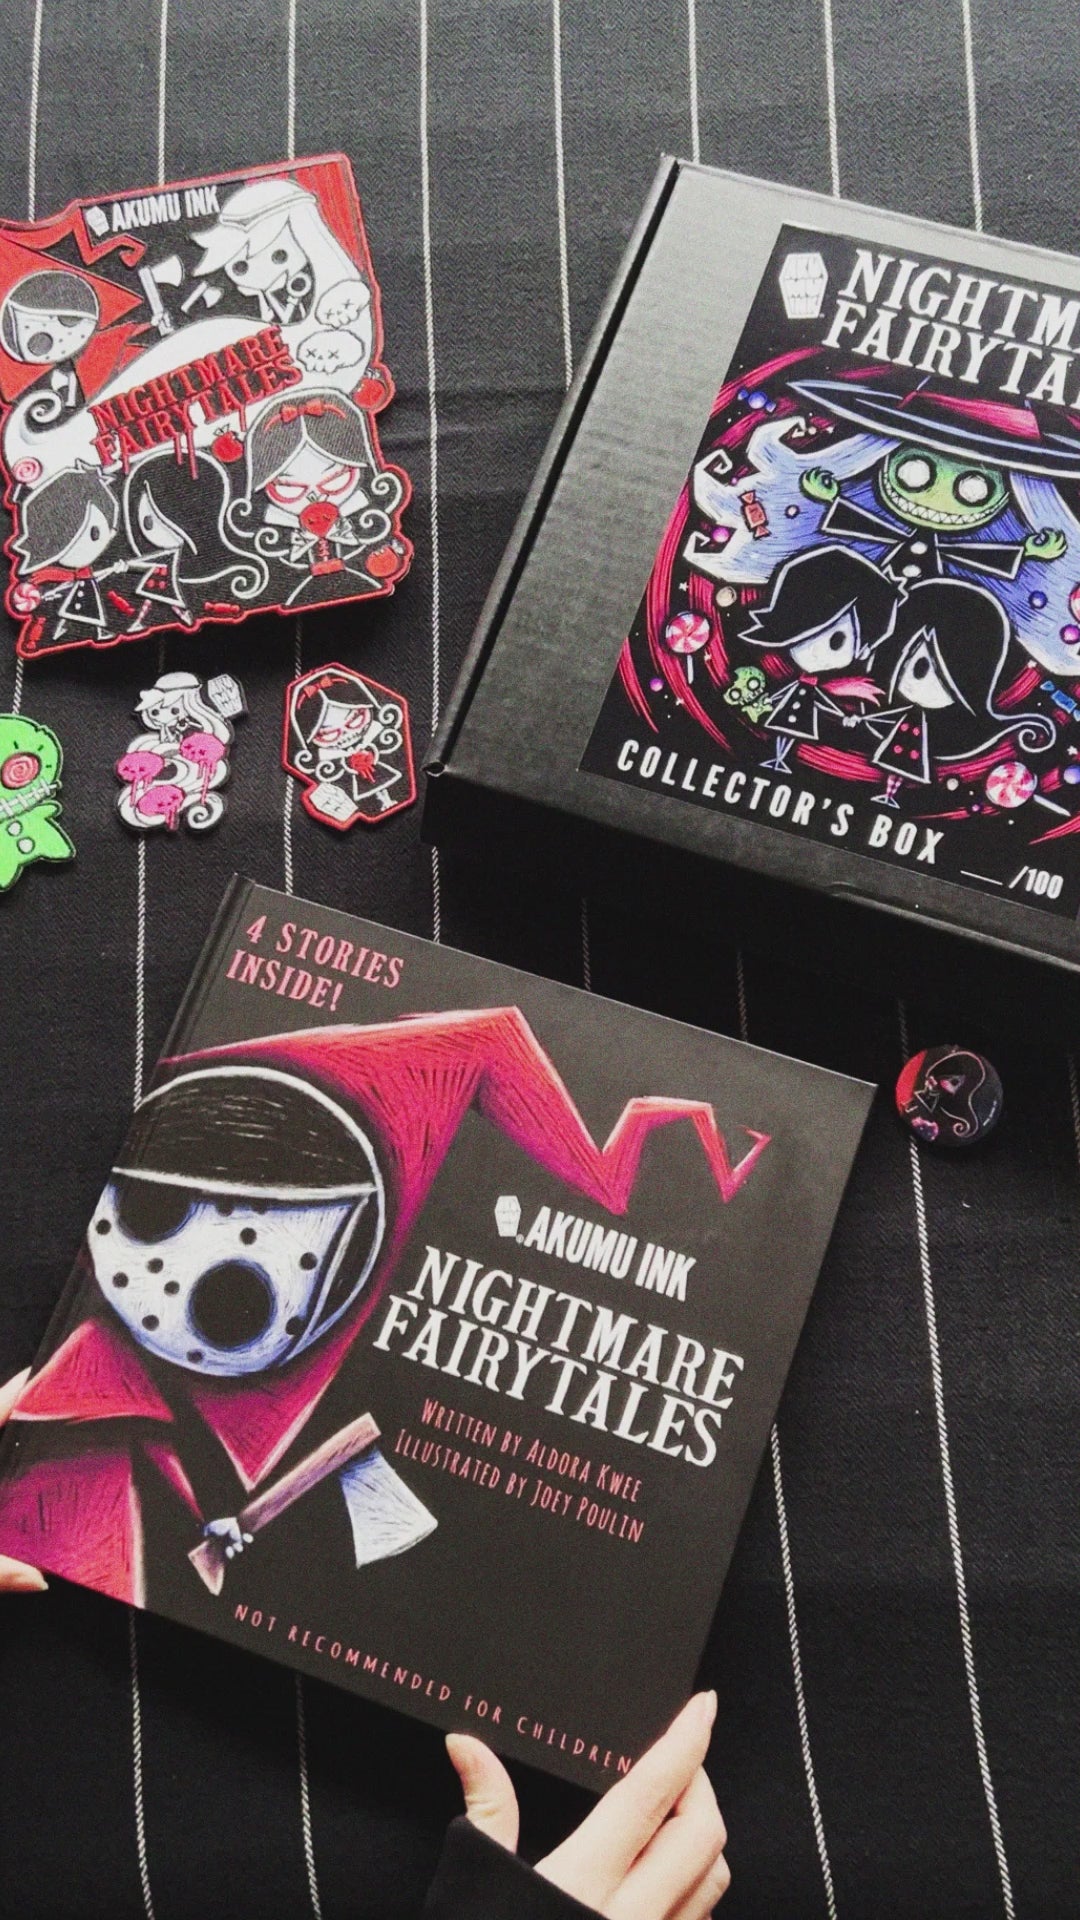 Nightmare Fairytales Limited Collector's Boxset